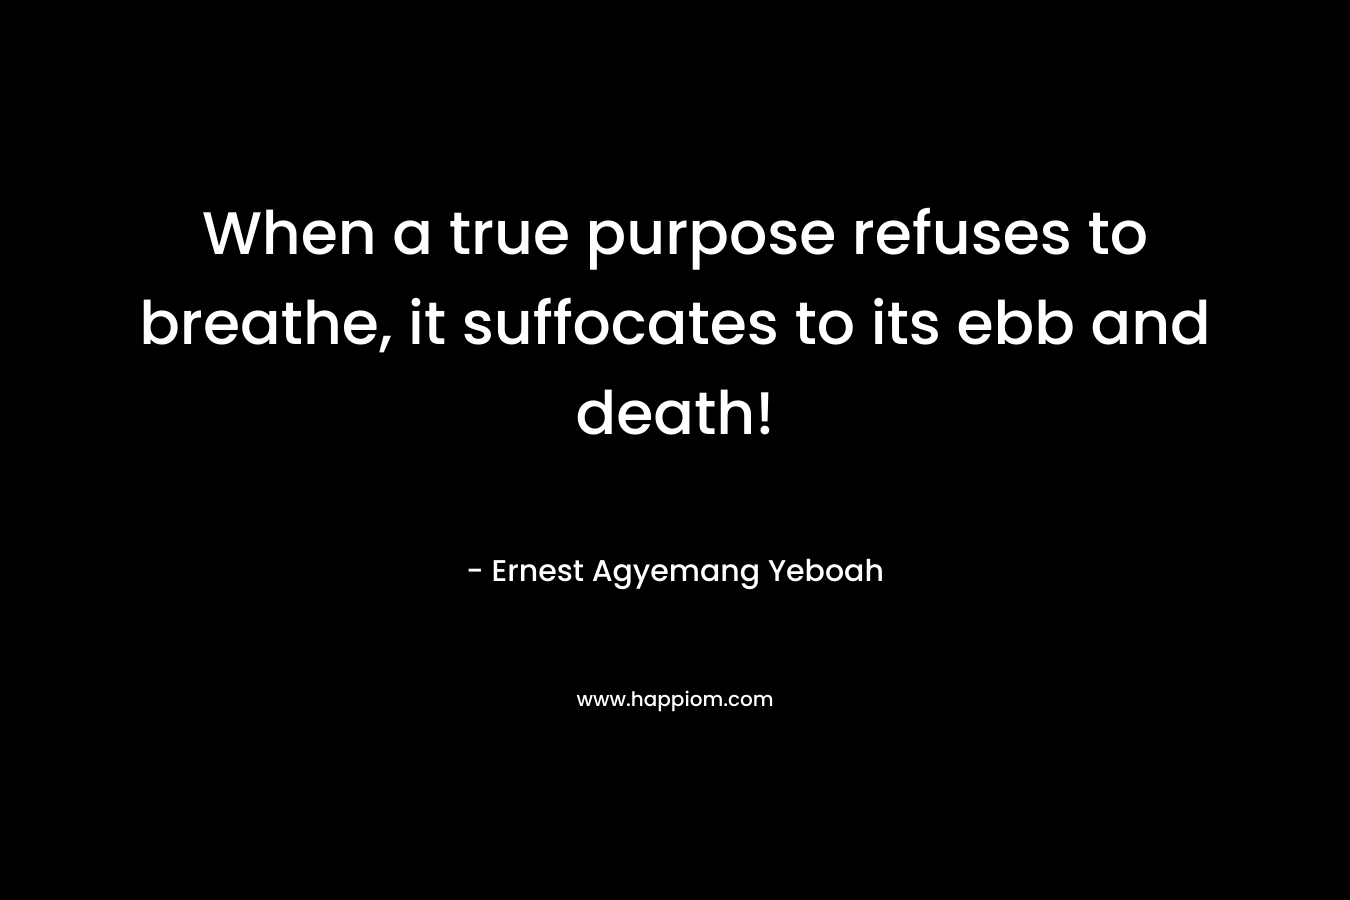 When a true purpose refuses to breathe, it suffocates to its ebb and death! – Ernest Agyemang Yeboah